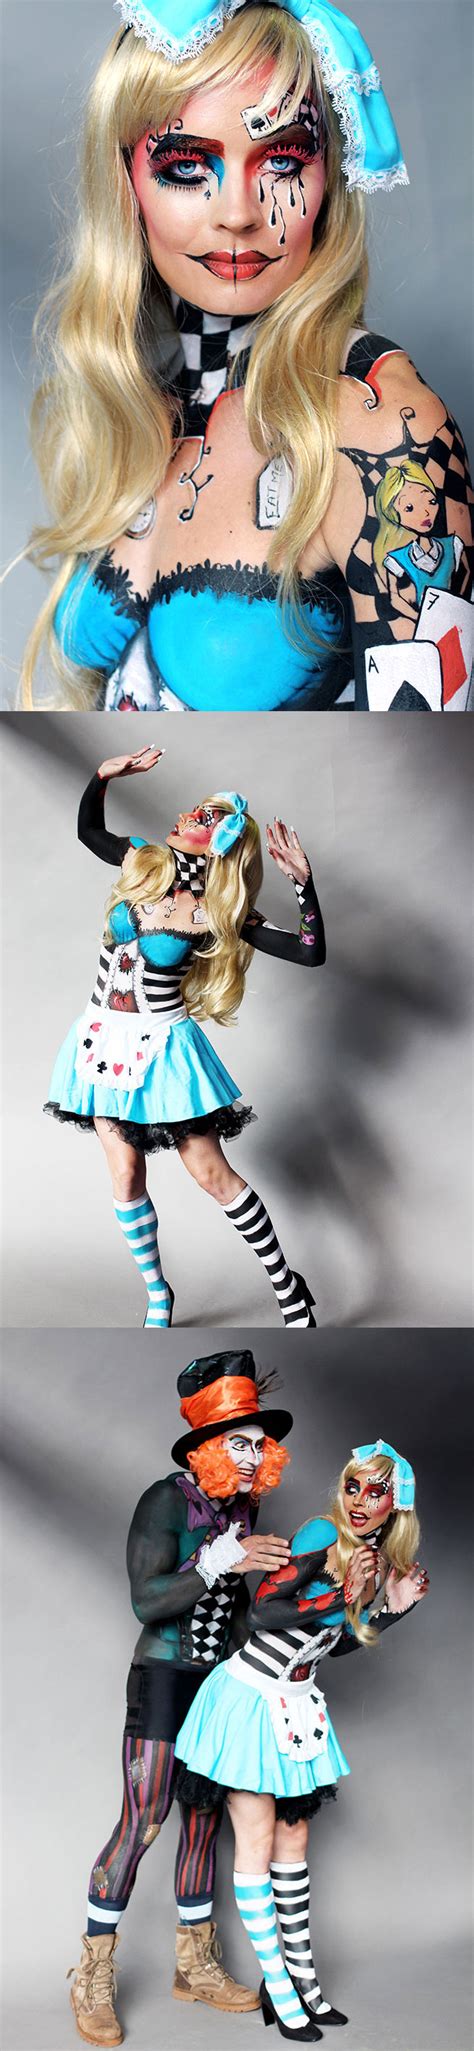 Twisted Alice In Wonderland With Mad Hatter Bodypainted By Anna Lingis